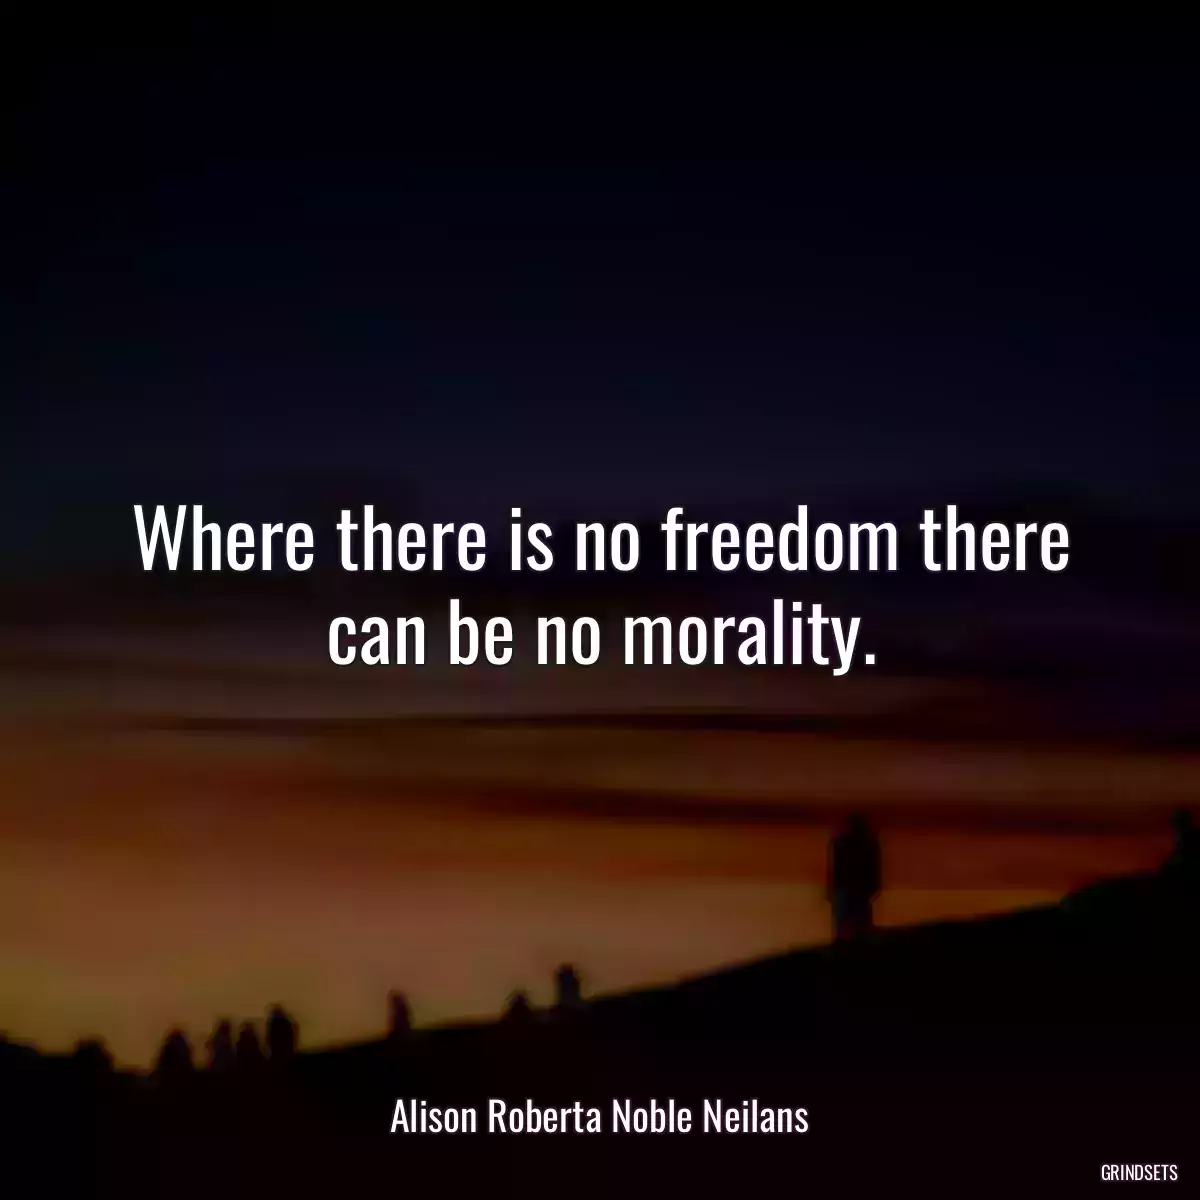 Where there is no freedom there can be no morality.